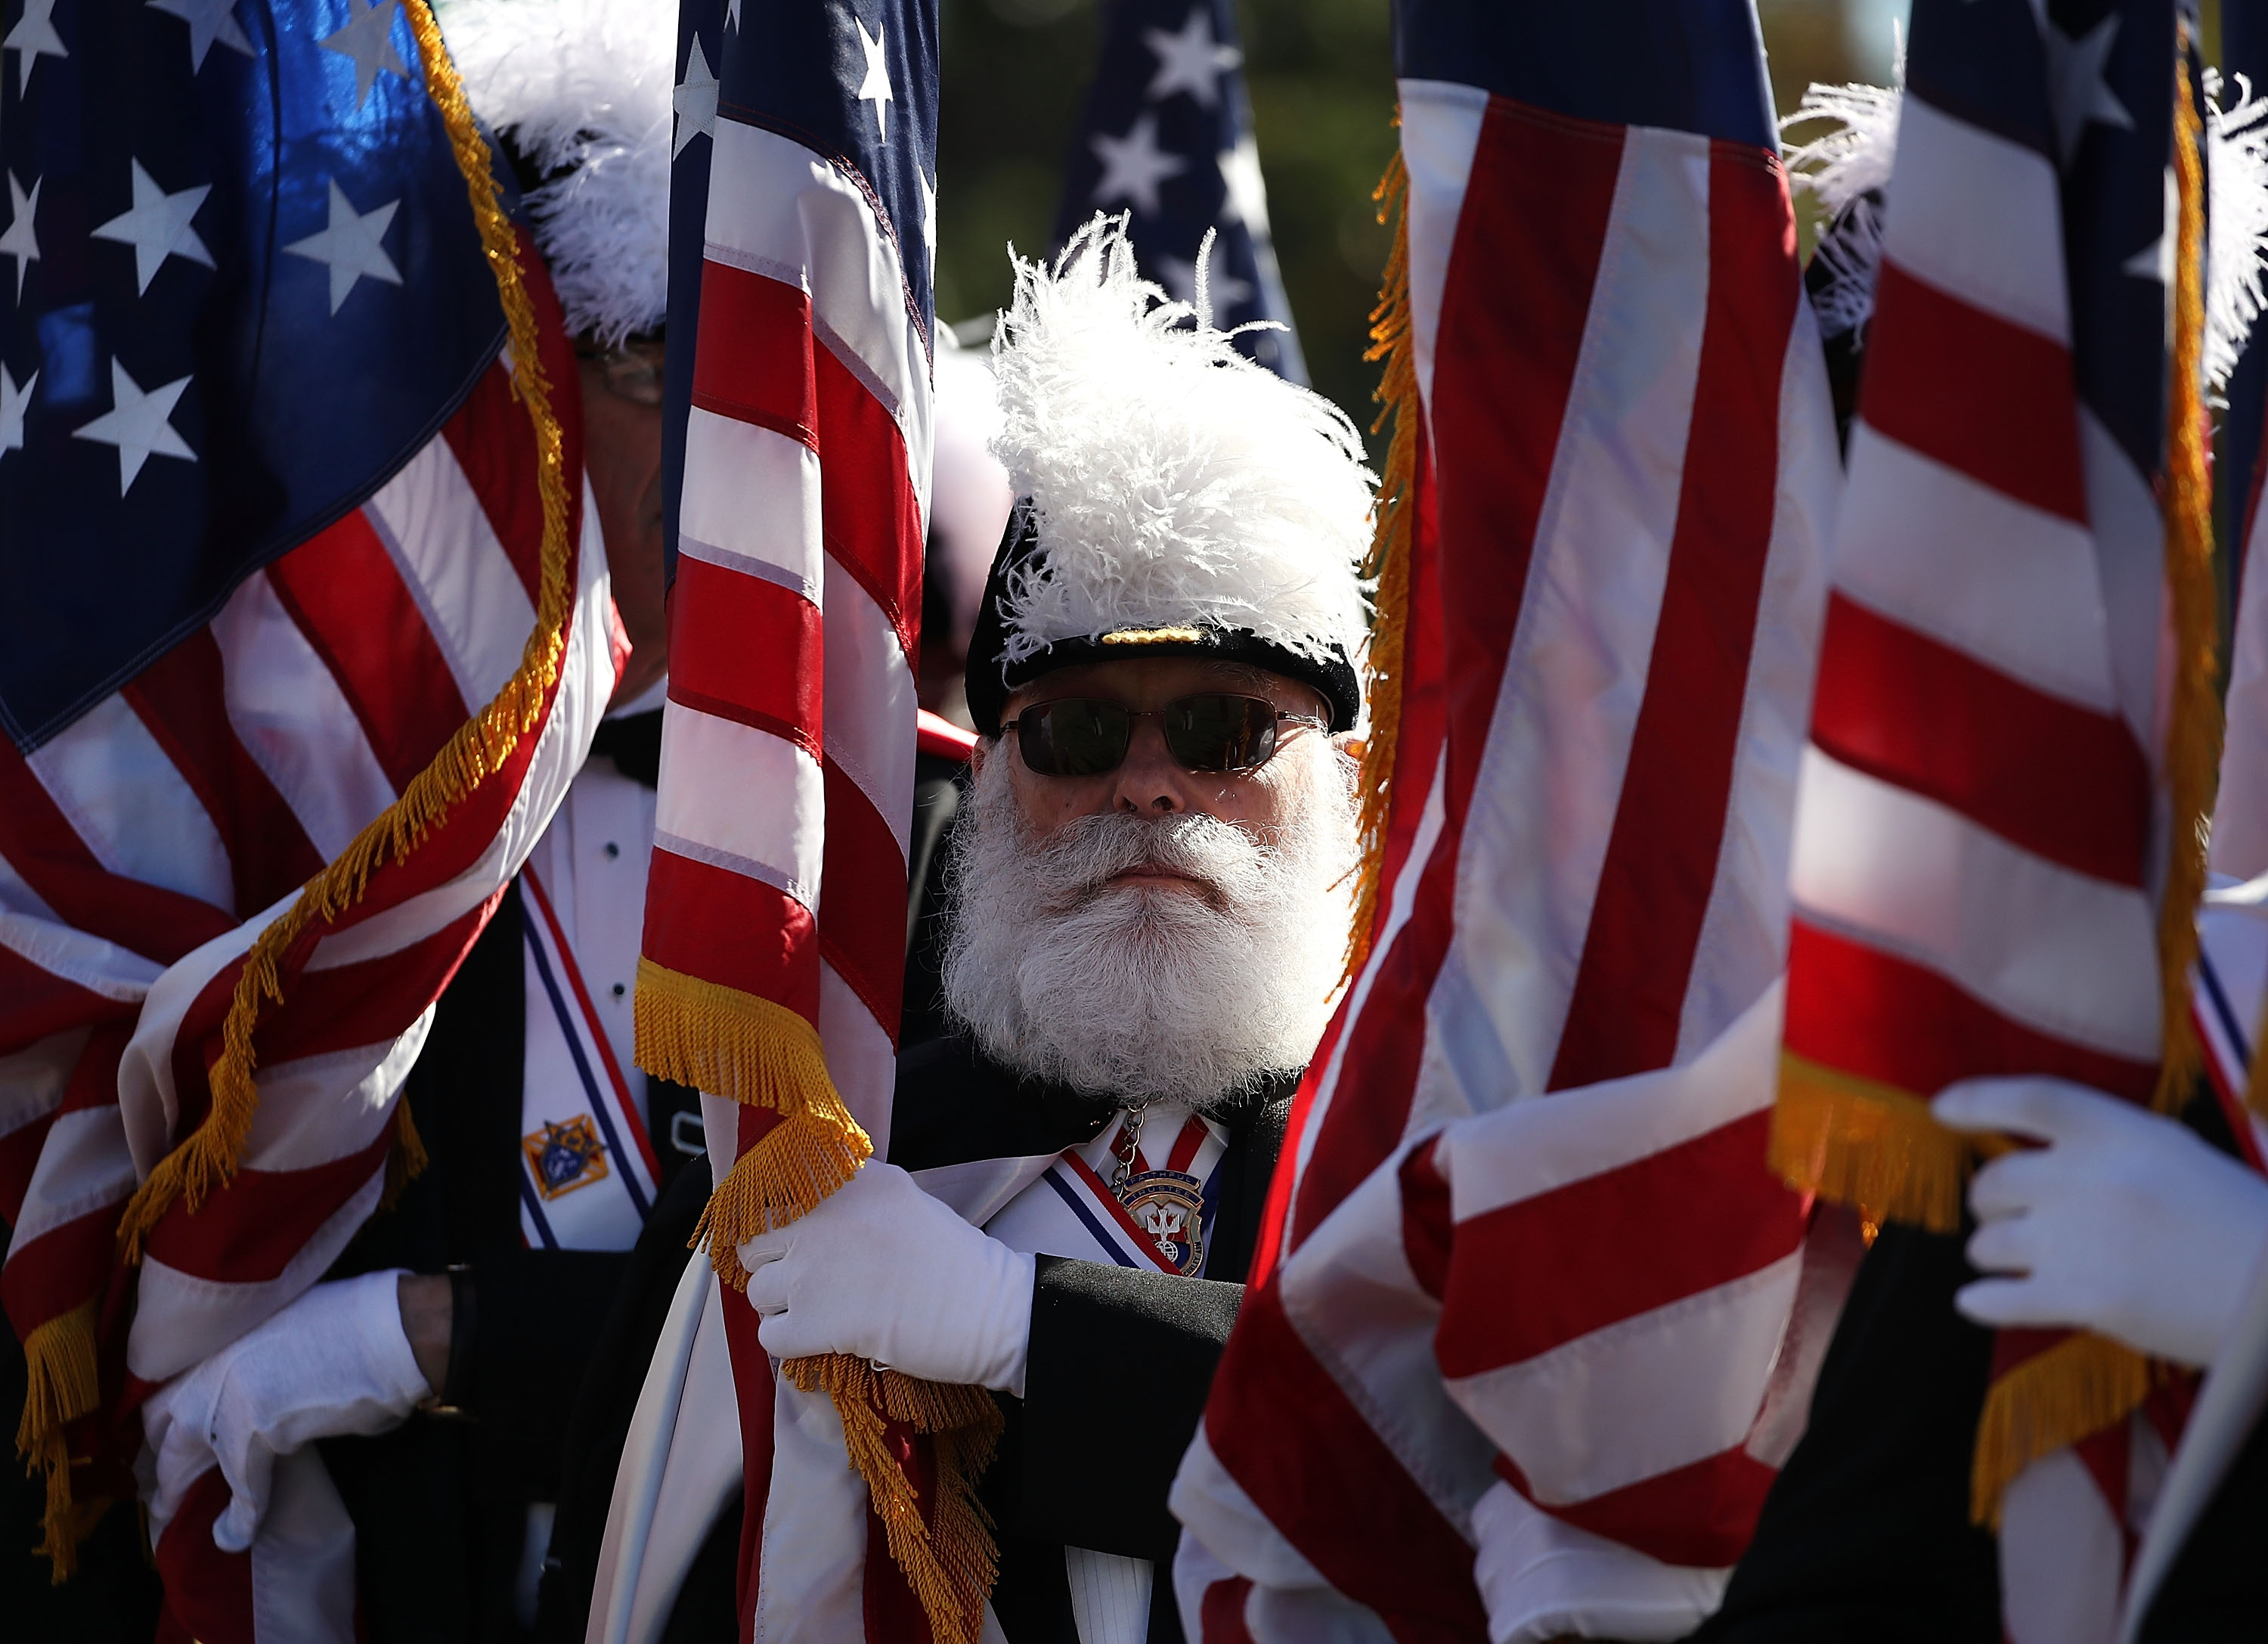 WASHINGTON, DC - OCTOBER 10: Knights of Columbus member, Dick Bissel holds an Amerian flag during a Columbus Day ceremony at the National Columbus Memorial in front of Union Station, October 10, 2016 in Washington, DC. Columbus Day celebrates Christopher Columbus' arrival in the Americas on October 12, 1492. (Photo by Mark Wilson/Getty Images)